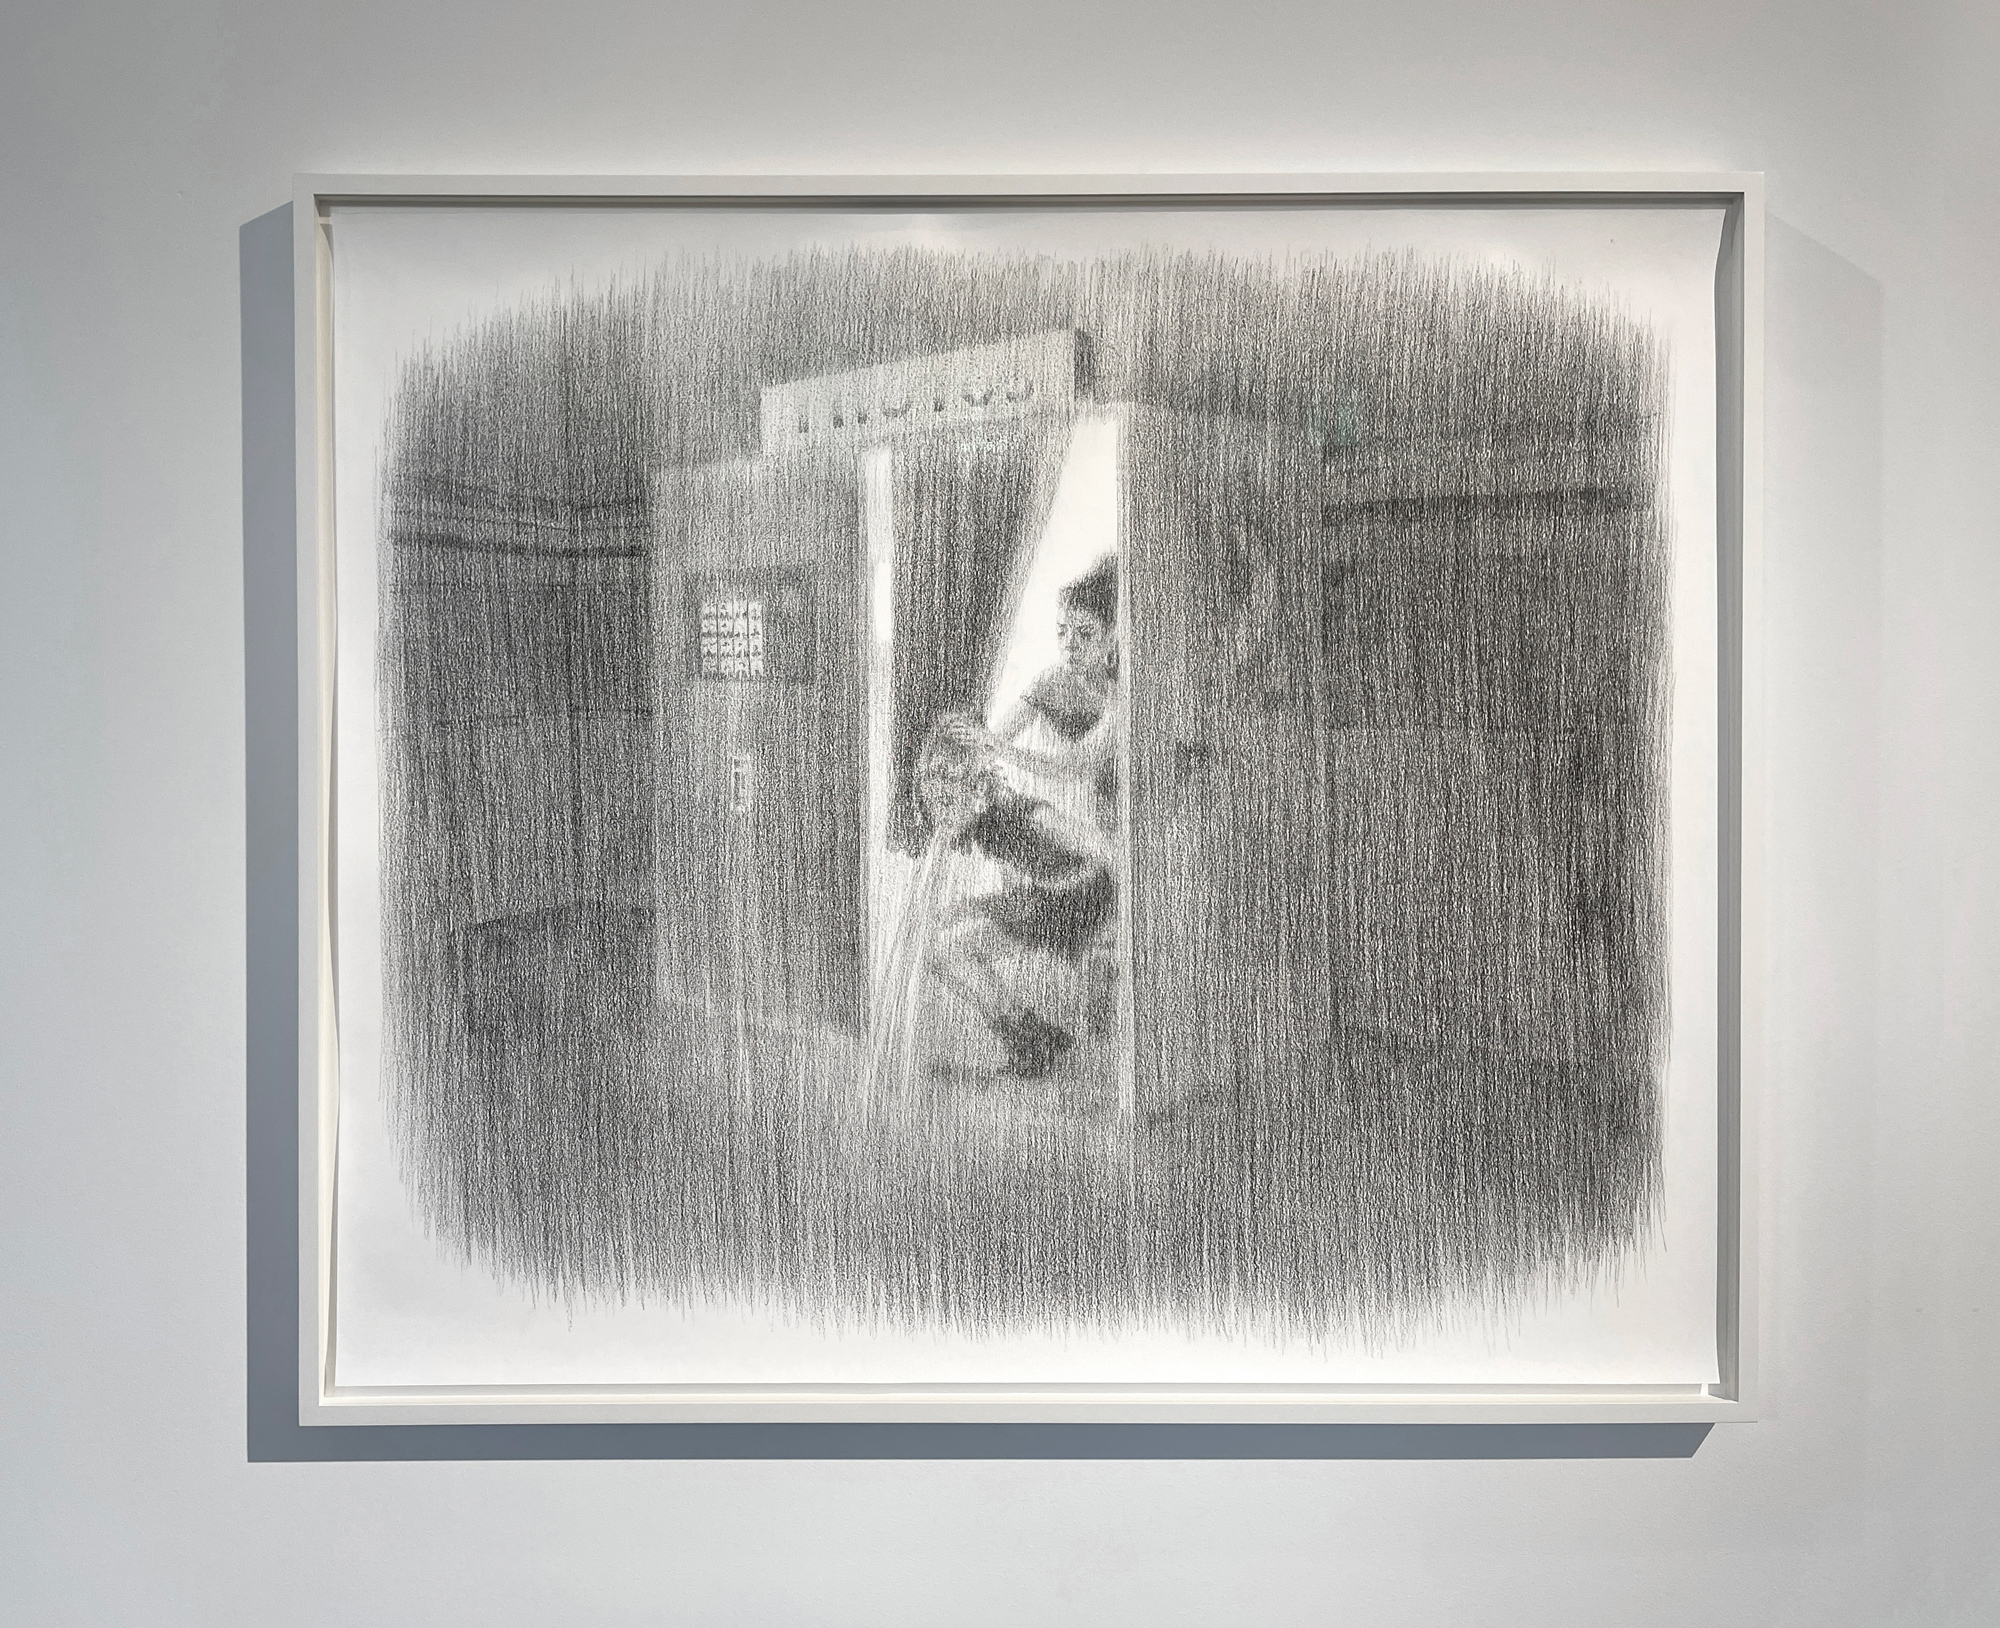 Noi Fuhrer, Photo Booth, 2023, charcoal on paper, 90 x 106 cm, exhibition view